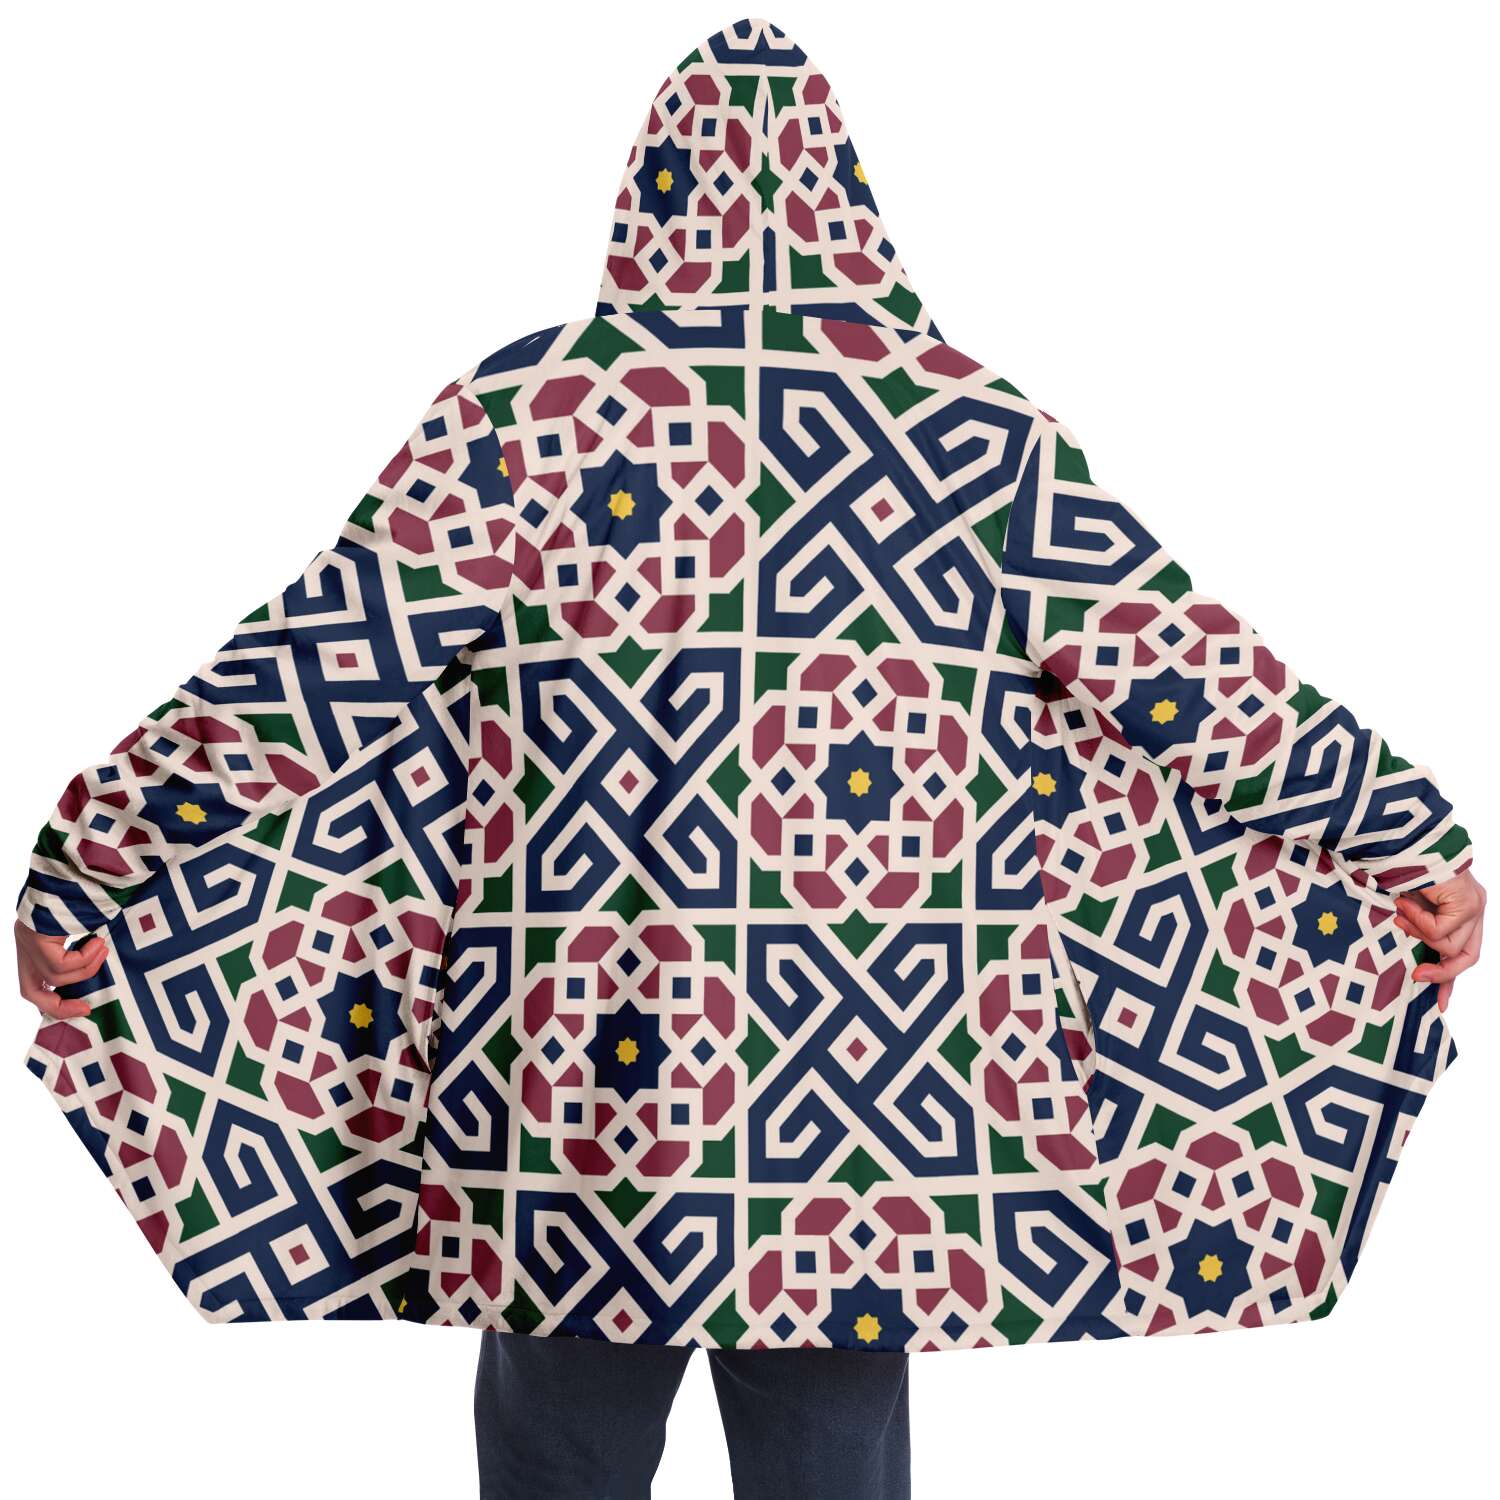 The Miracle of the East Moroccan Microfleece Cloak DromedarShop.com Online Boutique